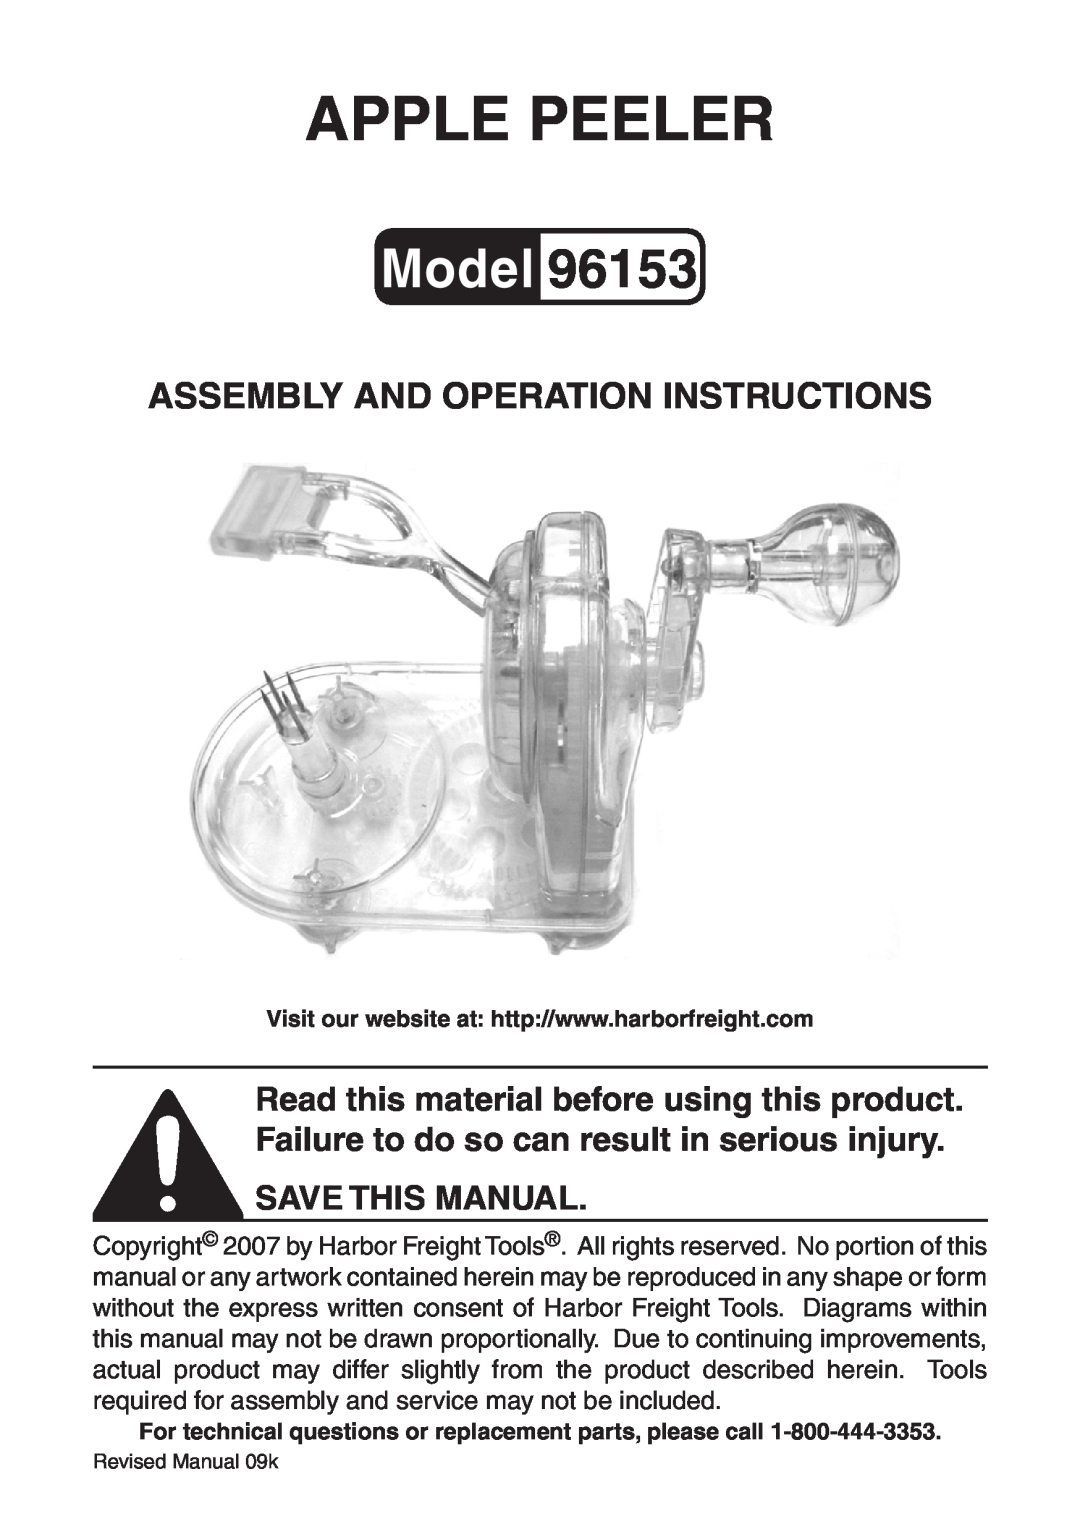 Harbor Freight Tools 96153 manual Save this manual, Apple peeler, Model, Assembly And Operation Instructions 